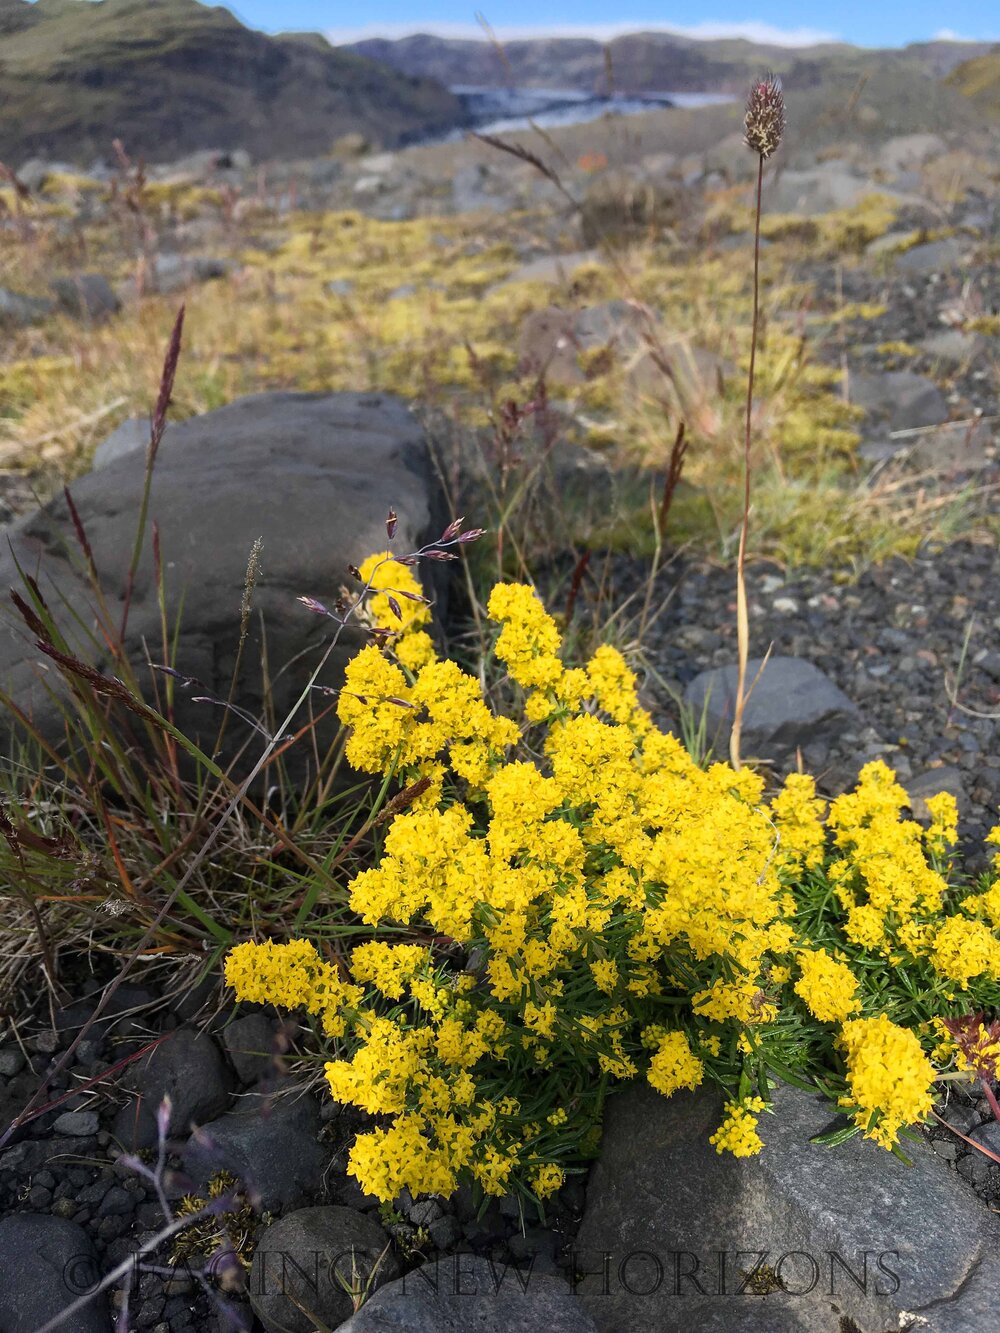  Even in this barren landscape, flashes of color abound 